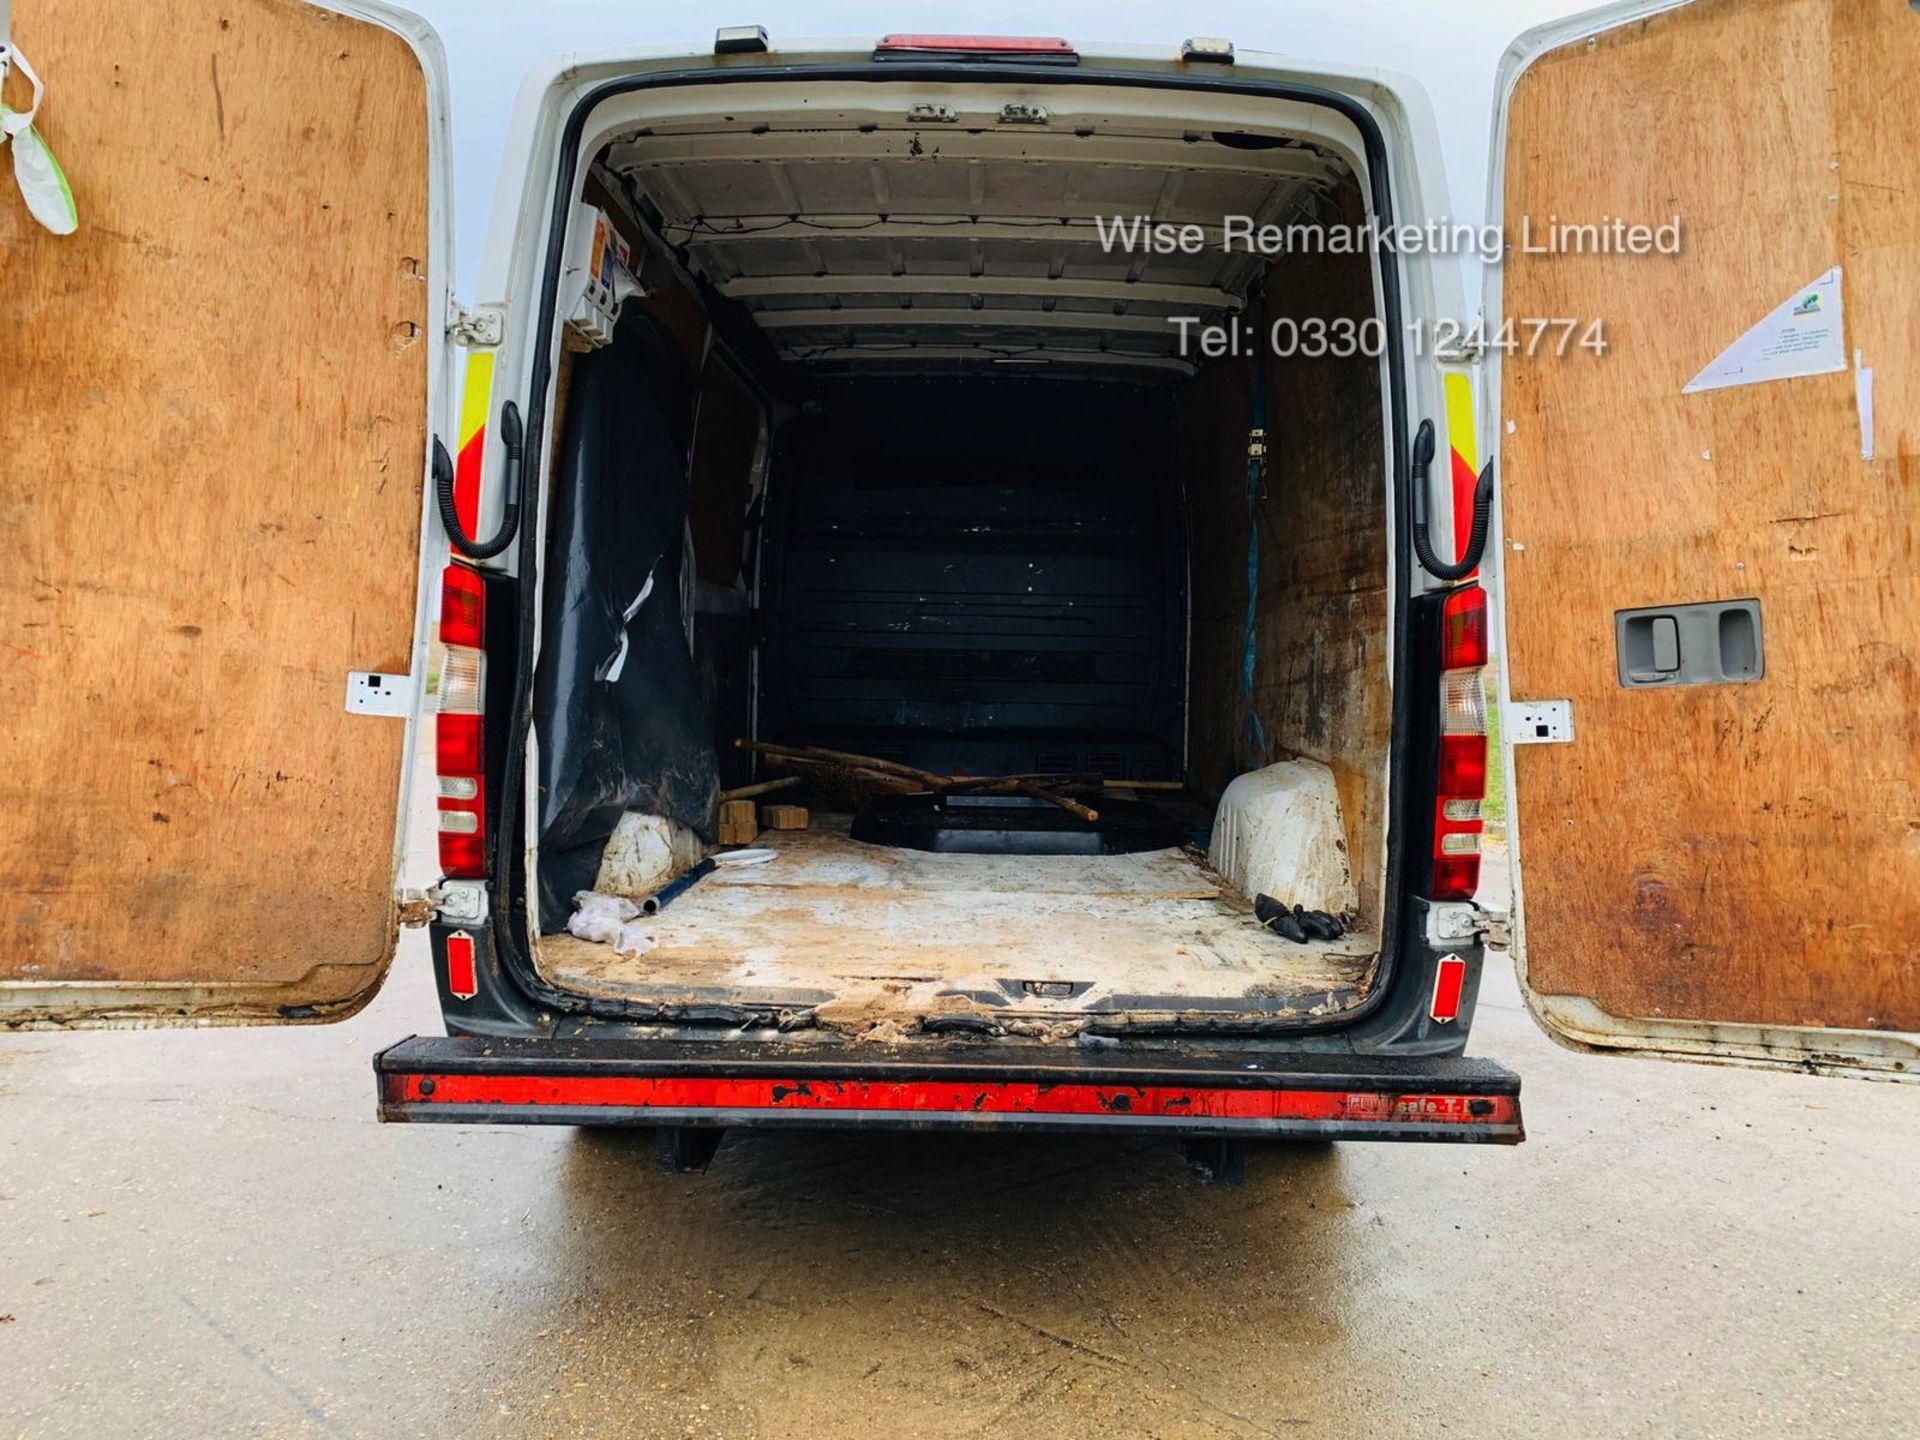 Mercedes Sprinter 313 2.1 CDI *Automatic Triptronic Gearbox* - 2011 Model - Ply Lined - Image 8 of 15